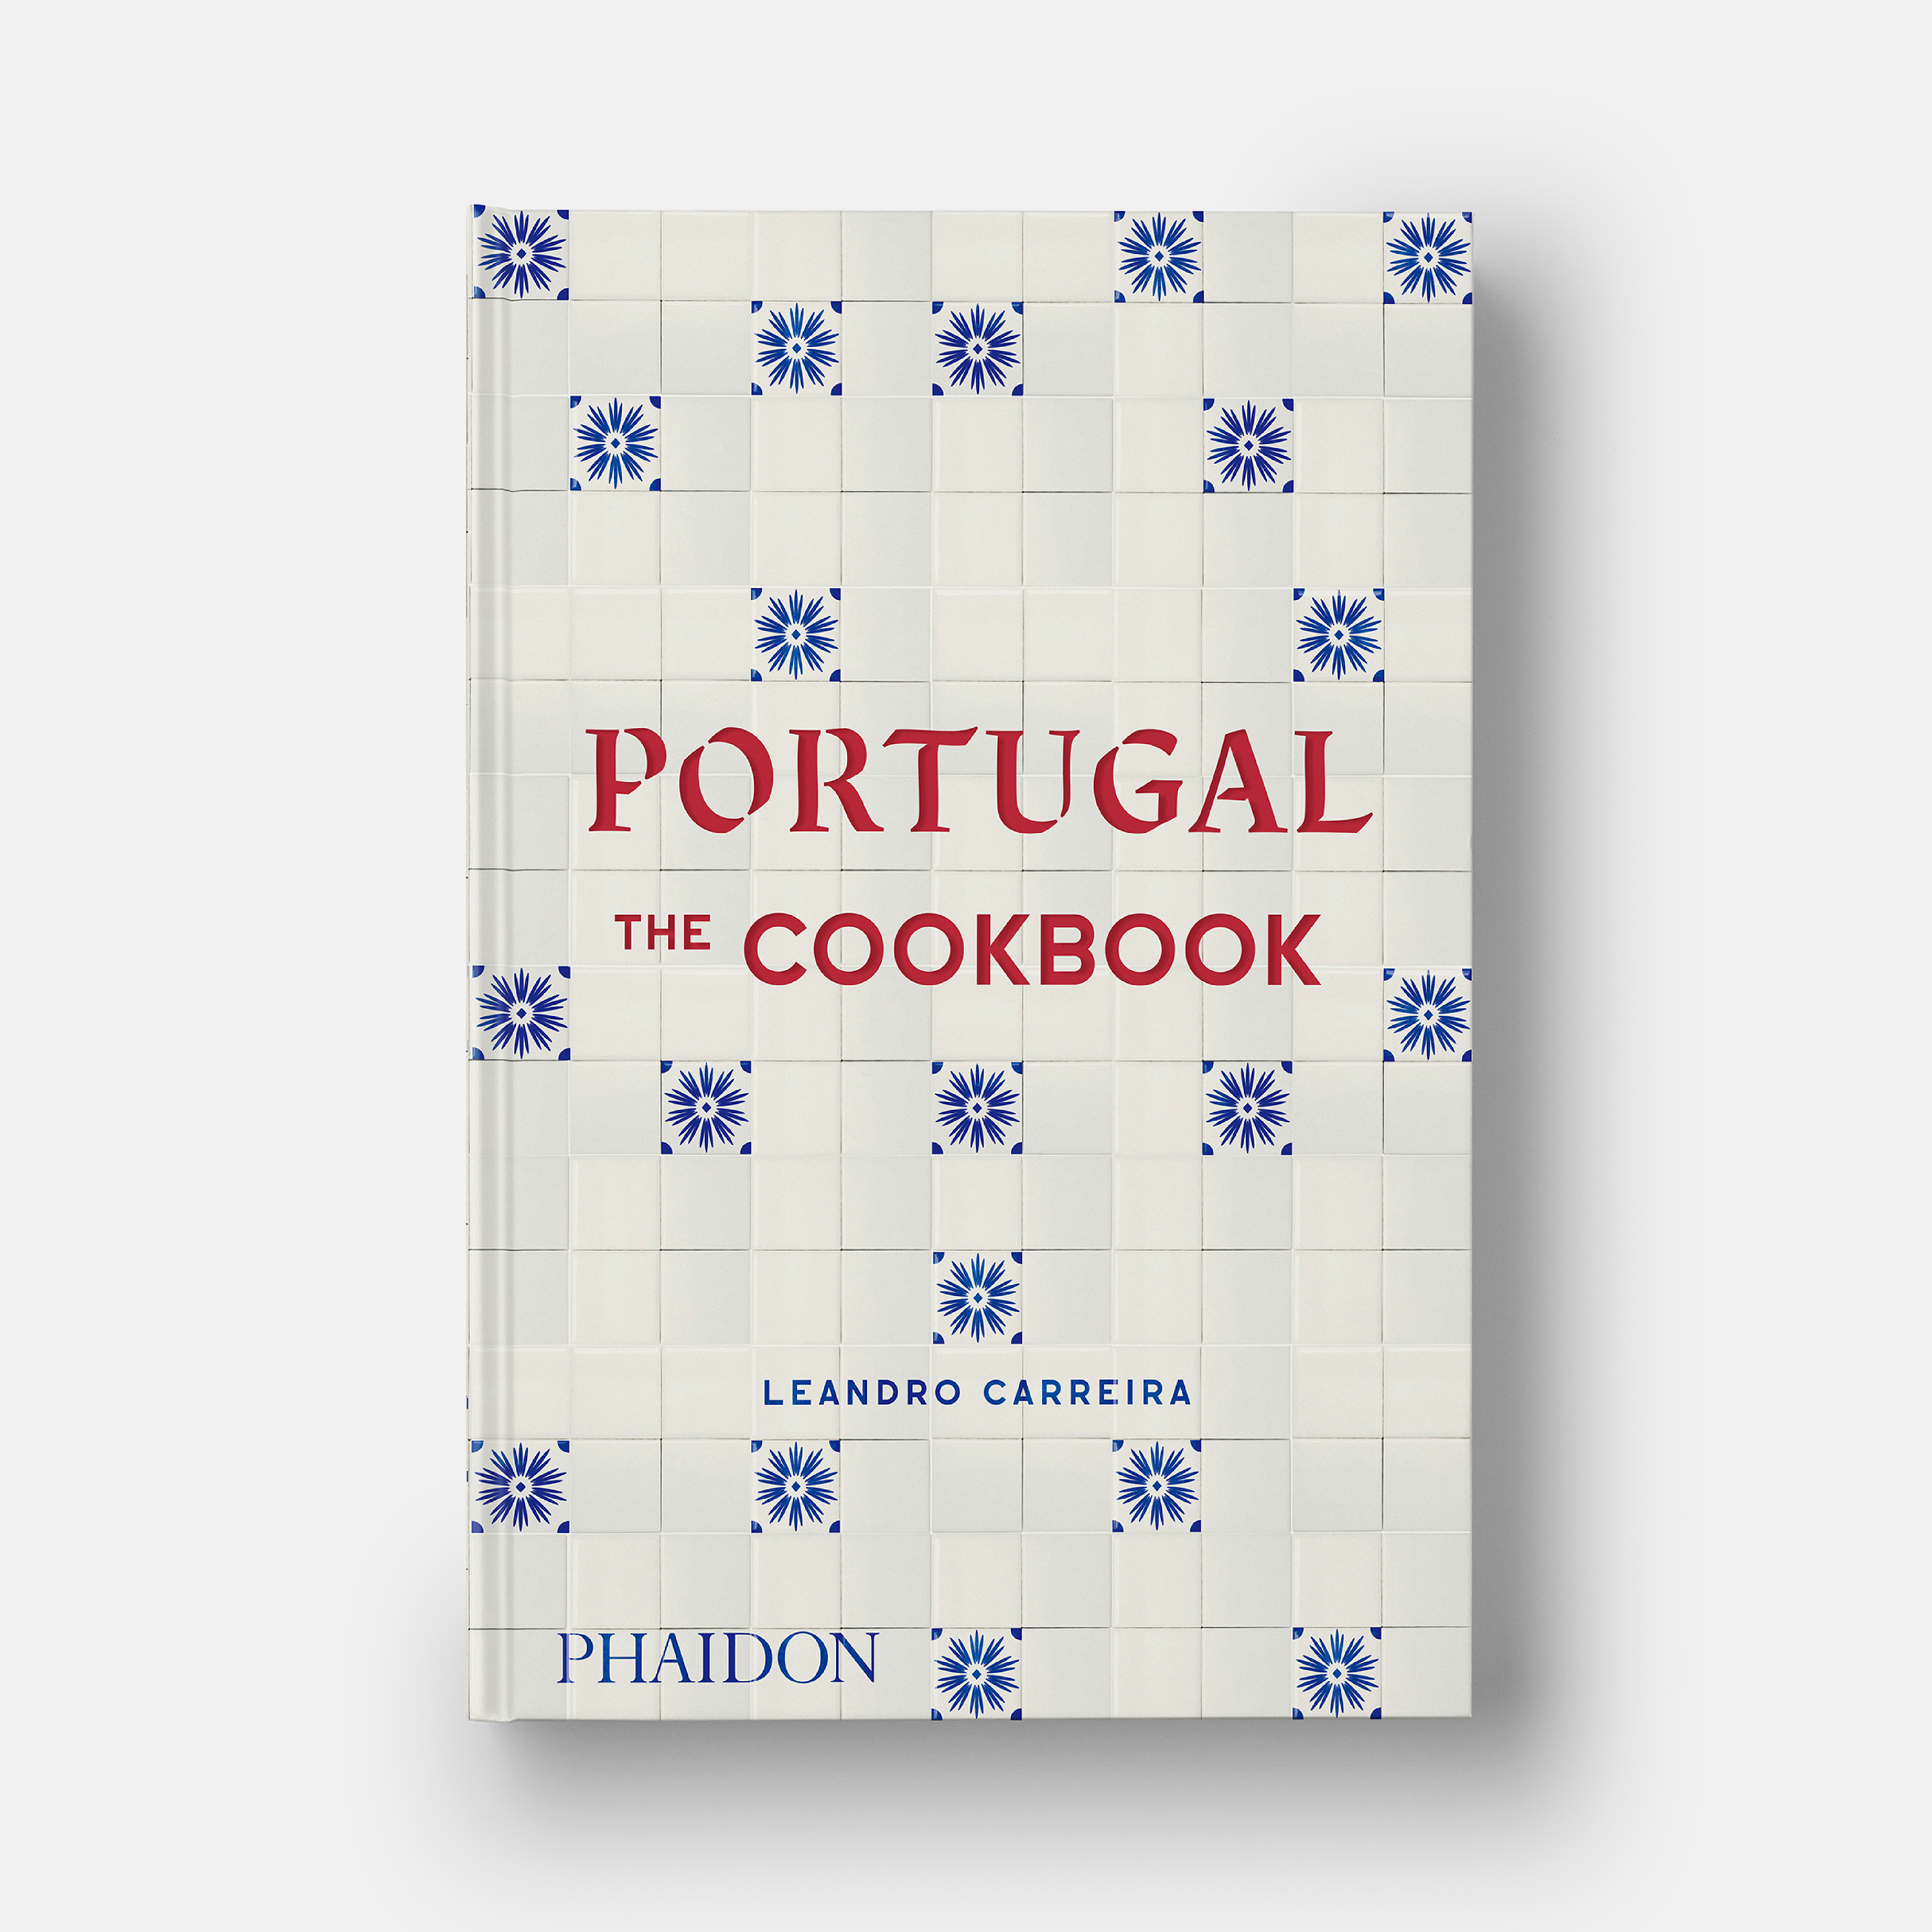 The stew that helped Portugal conquer the globe 